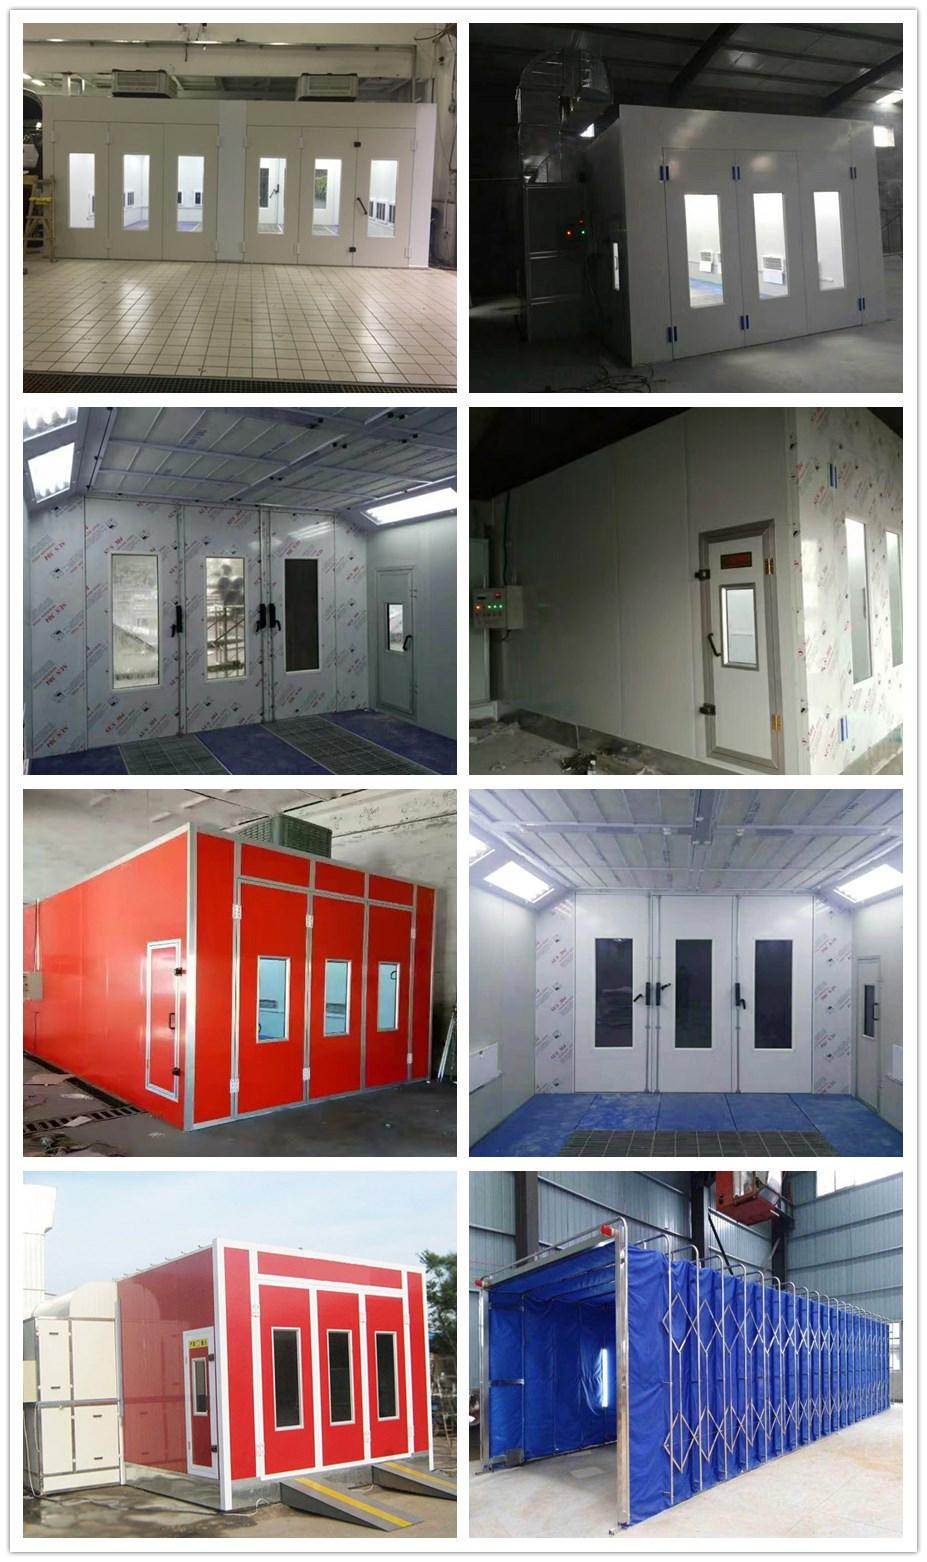 Spray Bake Paint Booth/Car Wash Booth/Lacquer Finish Spray Booth